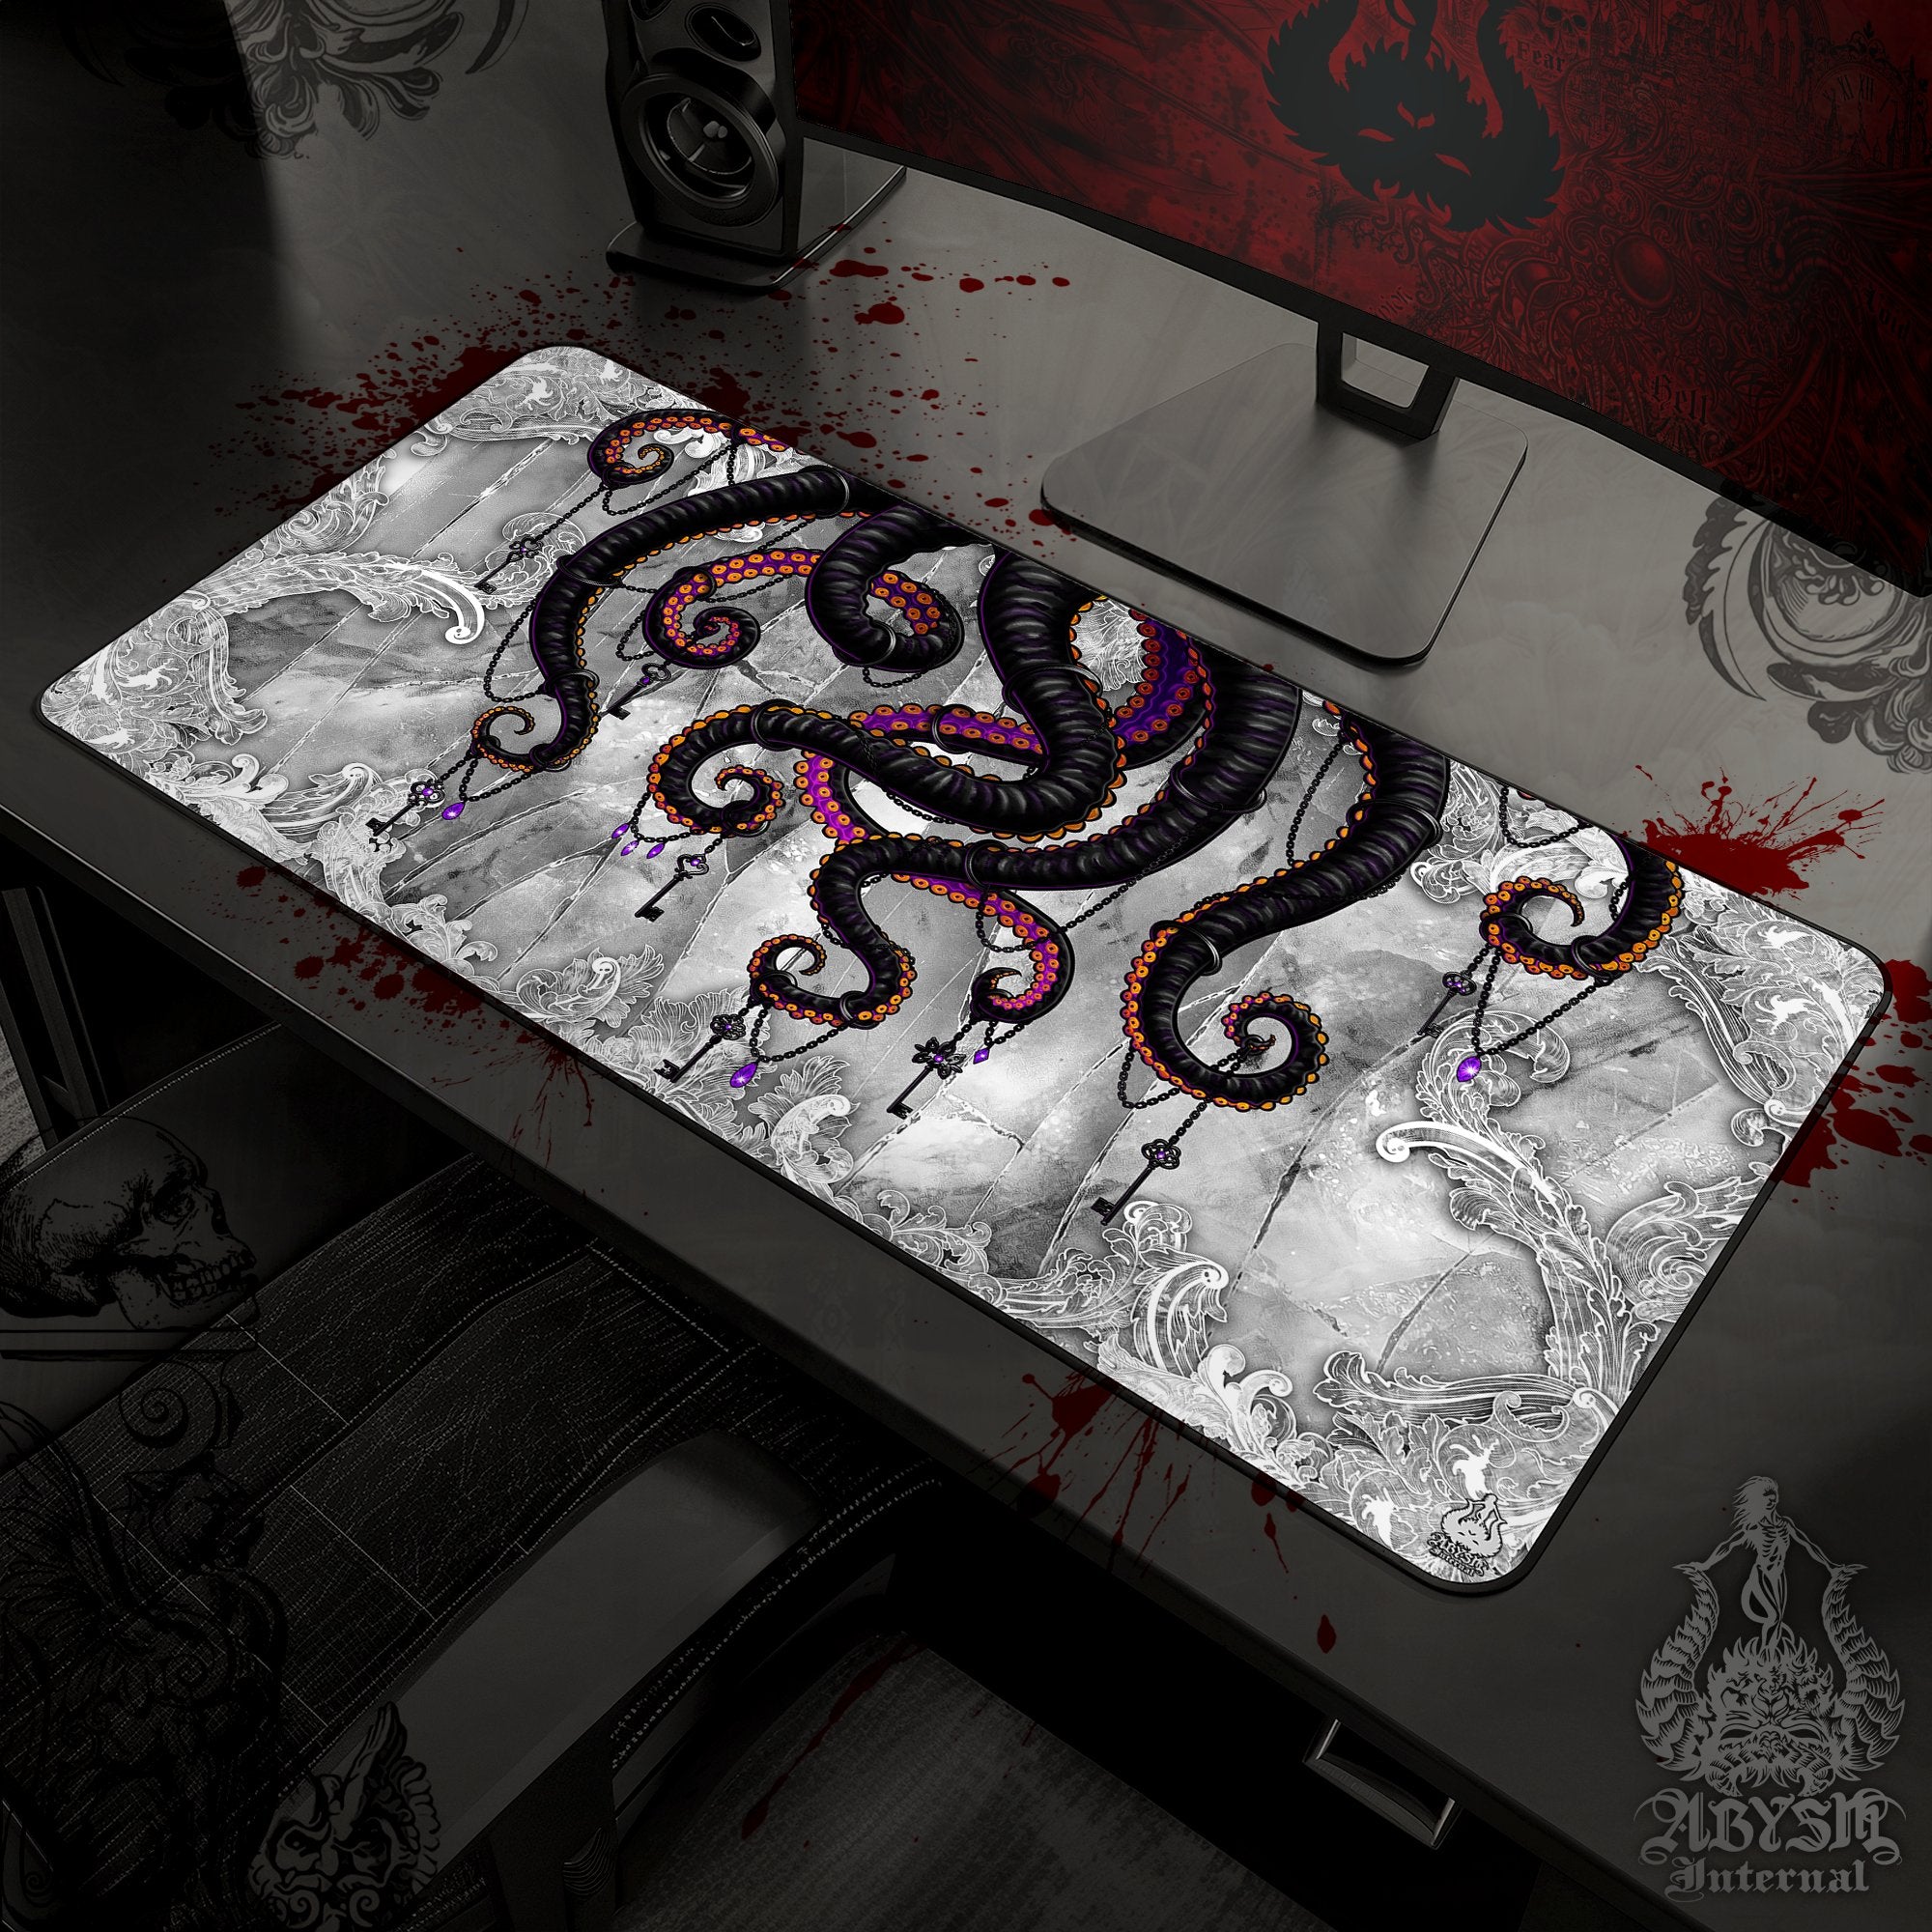 Octopus Gaming Mouse Pad, Tentacles Desk Mat, Gamer Table Protector Cover, White Goth Workpad, Fantasy Art Print - Stone - Abysm Internal